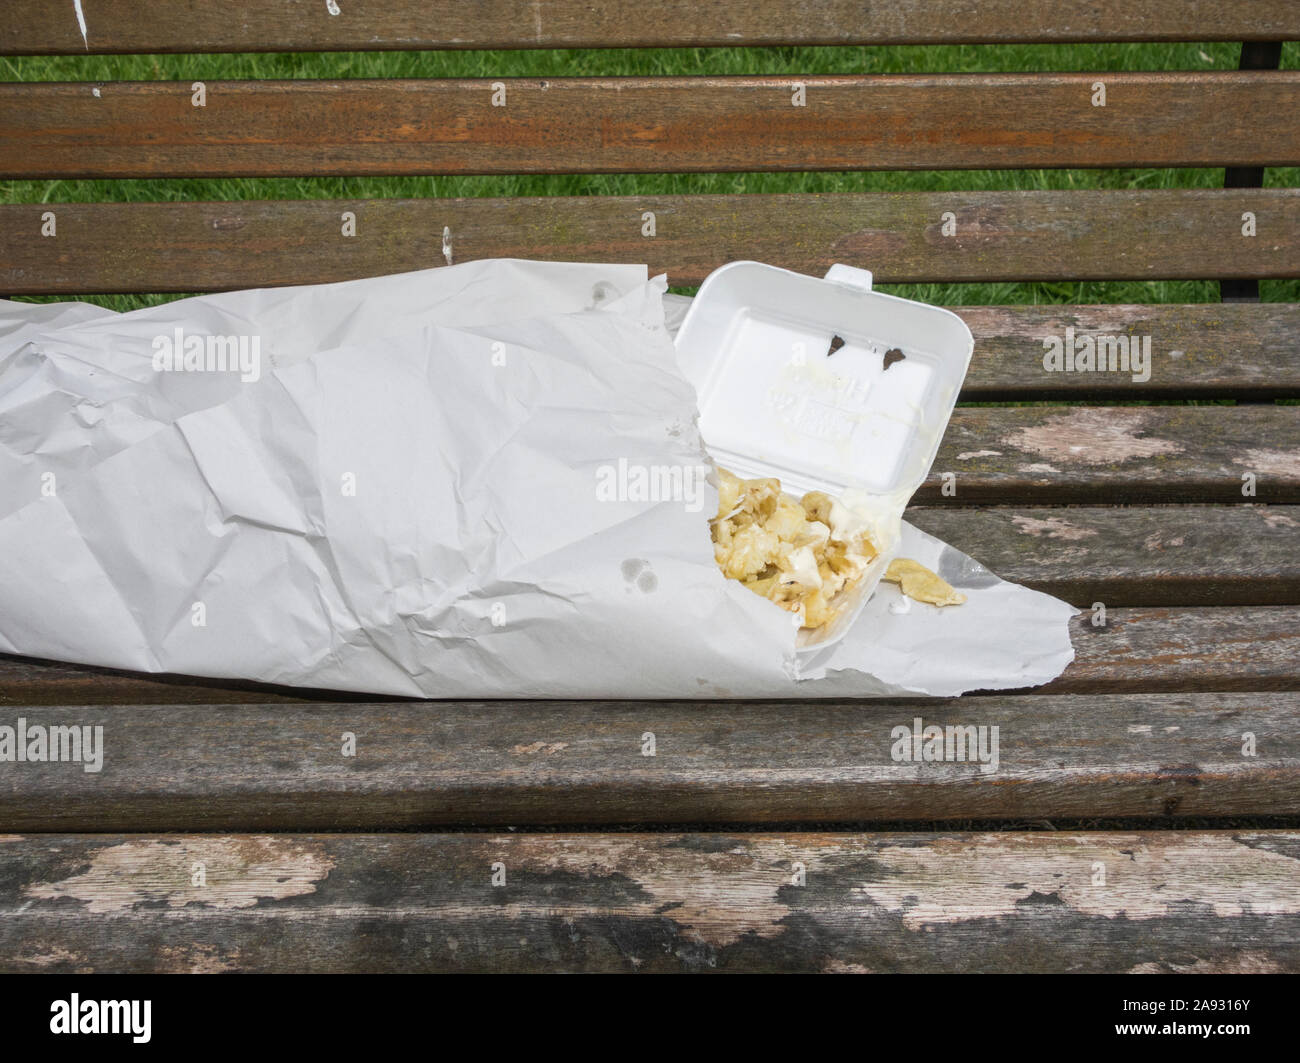 Discarded fish and chips on park bench. UK Stock Photo